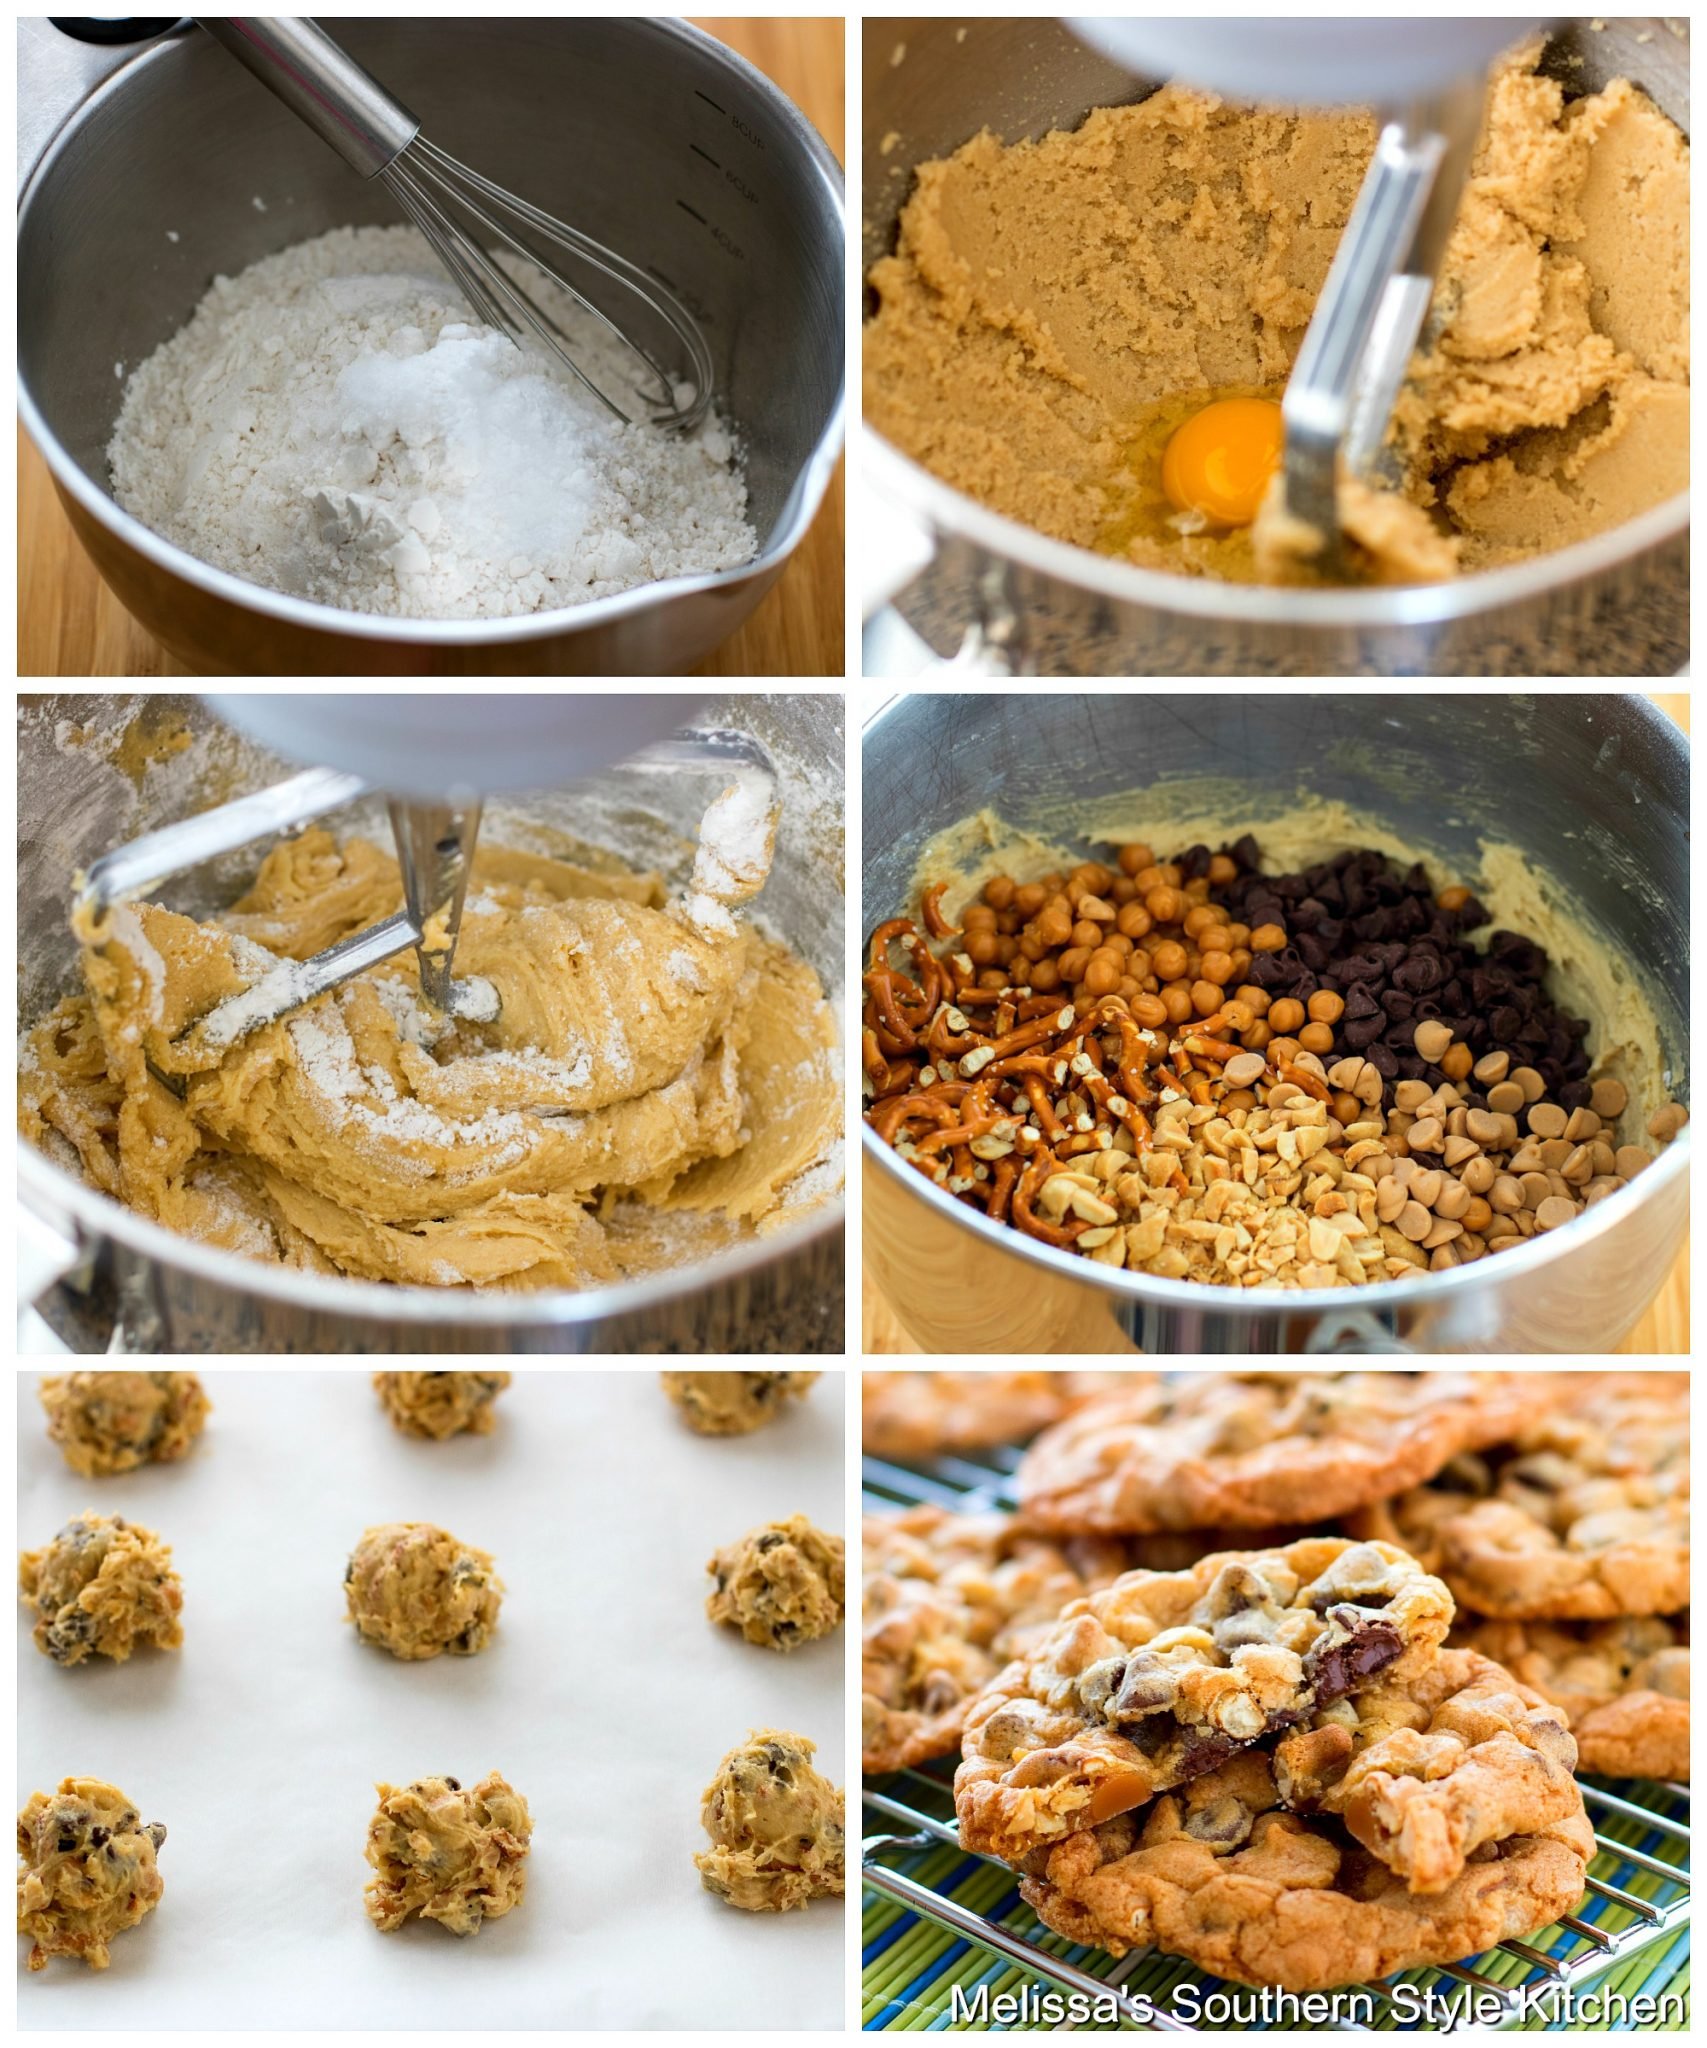 Step-by-step preparation images and ingredients for cookies